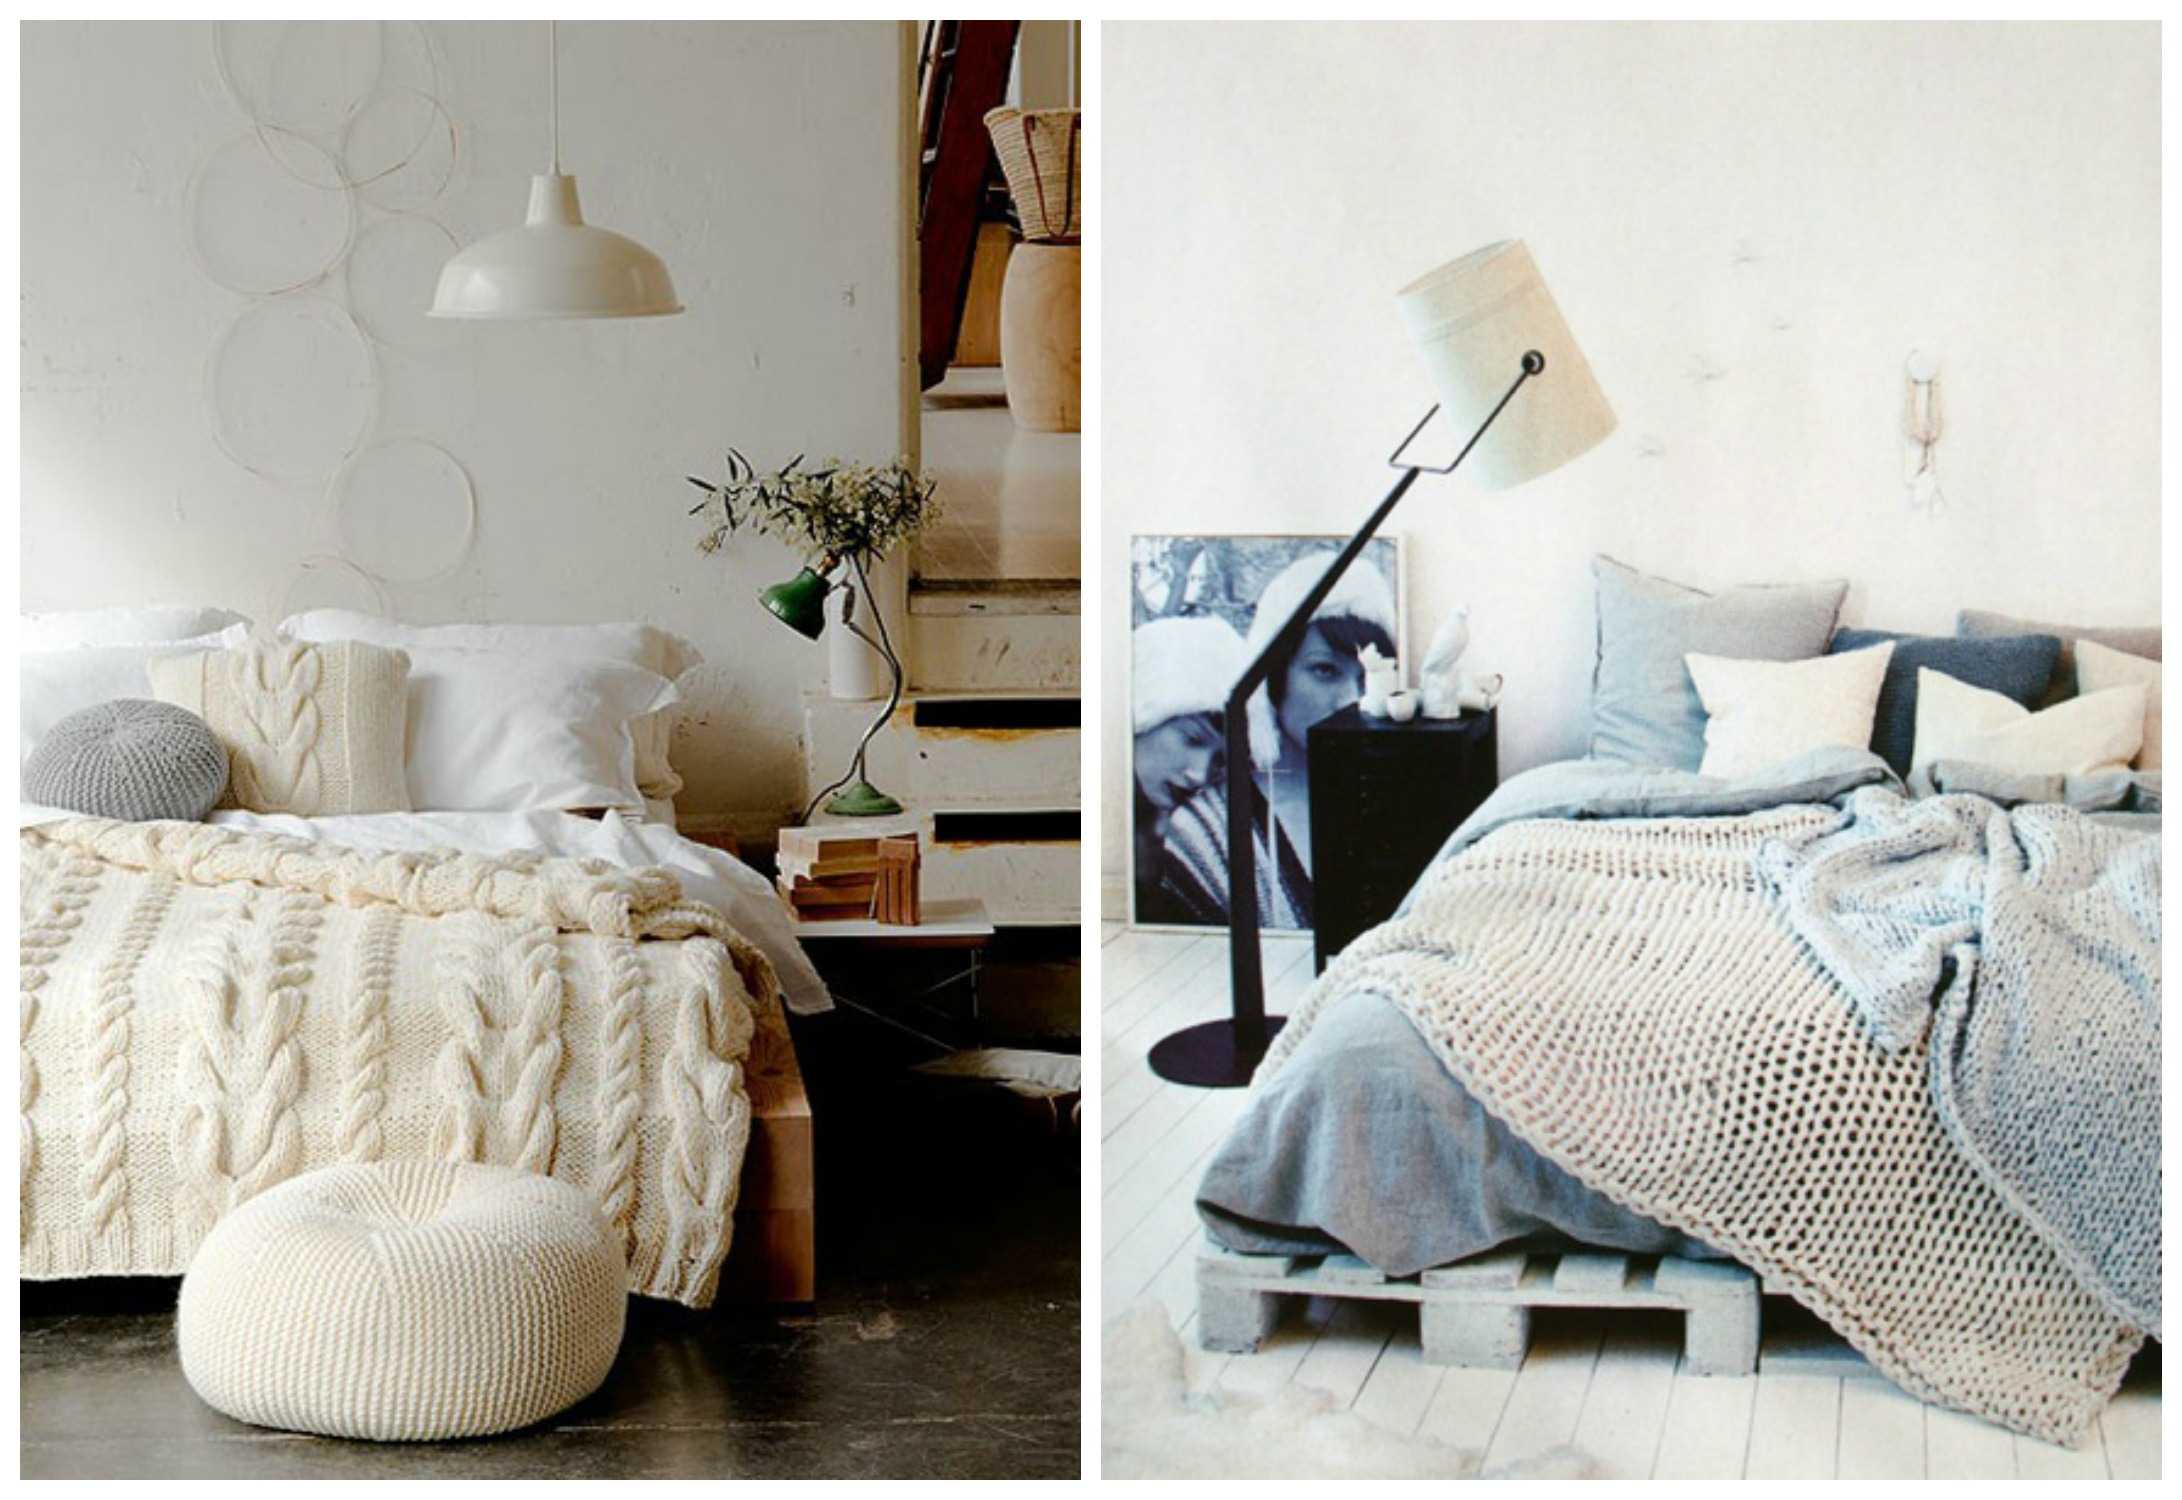 knitted pillowcases in the style of the living room